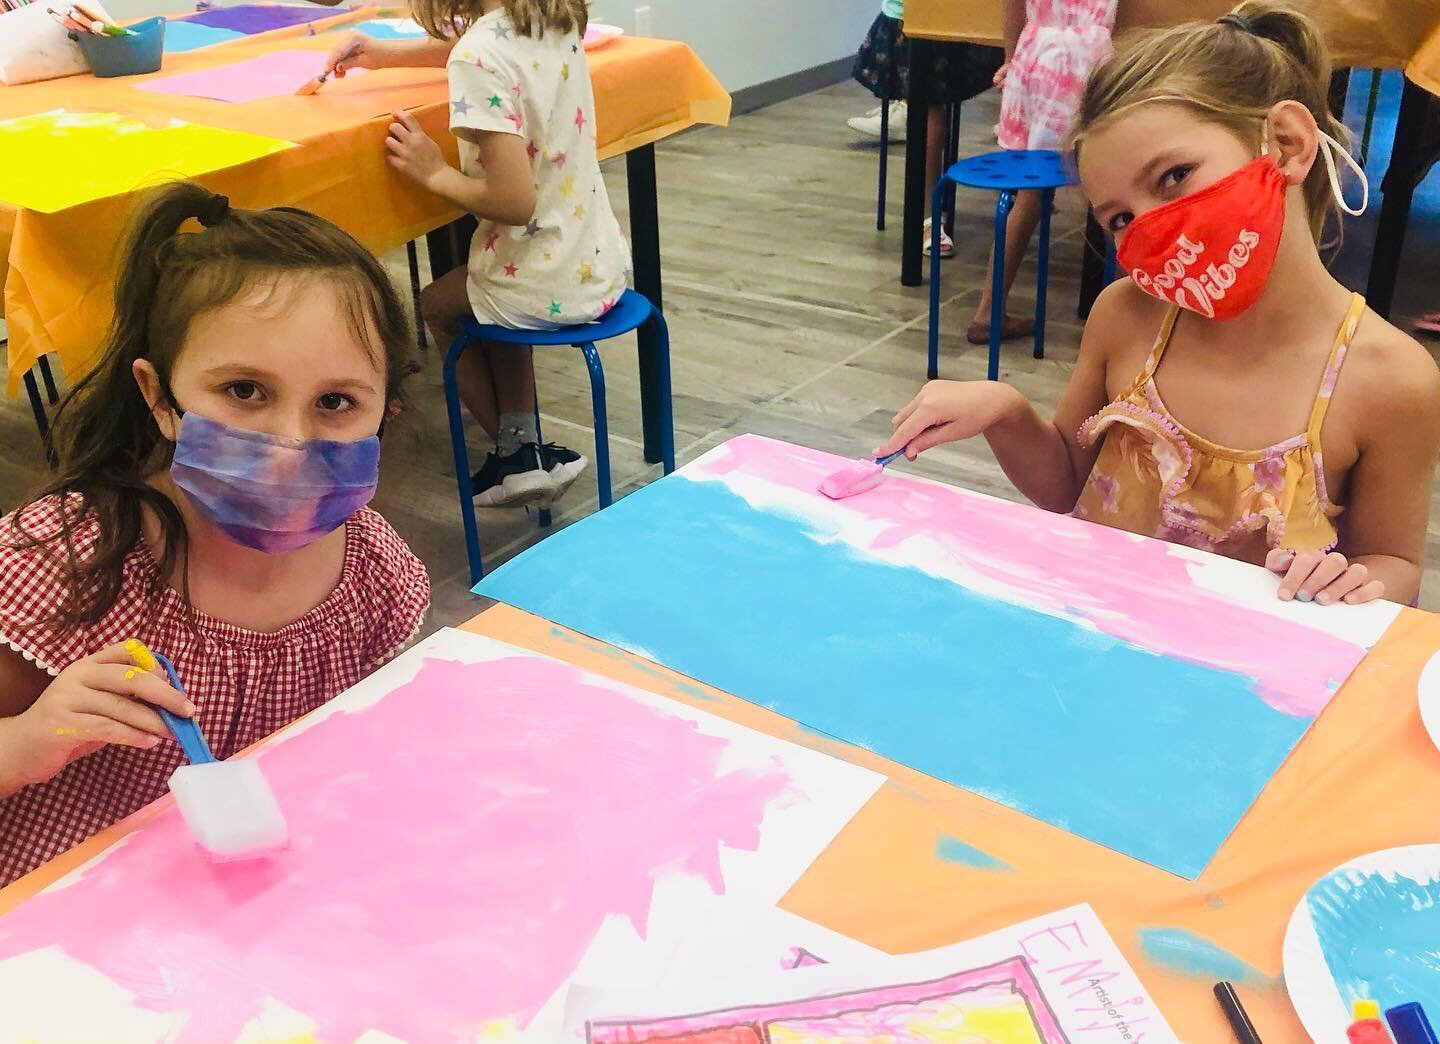 School is out on October 11th,  so come join the fun! Create a fun art project with a custom slime to match. Sign up now, spaces fill very quickly! (Don&rsquo;t say we didn&rsquo;t warn you😁) Link to register in bio.